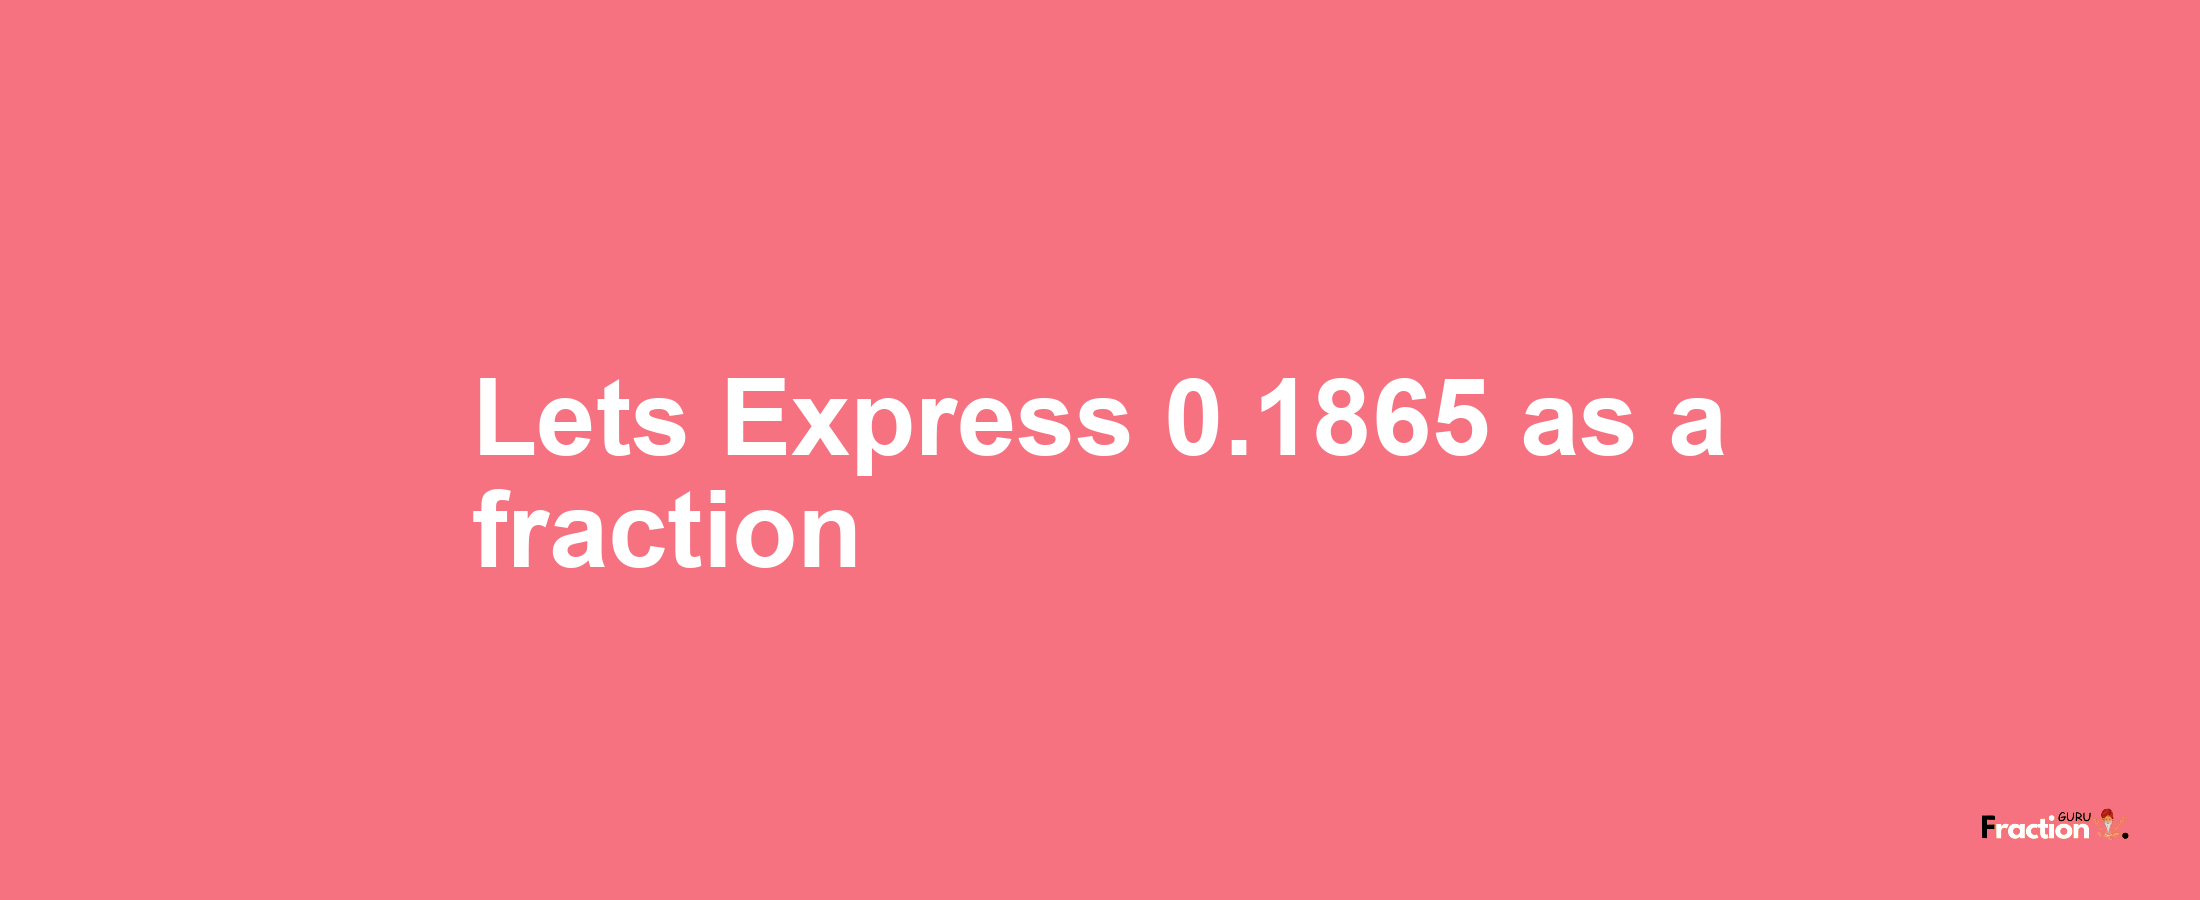 Lets Express 0.1865 as afraction